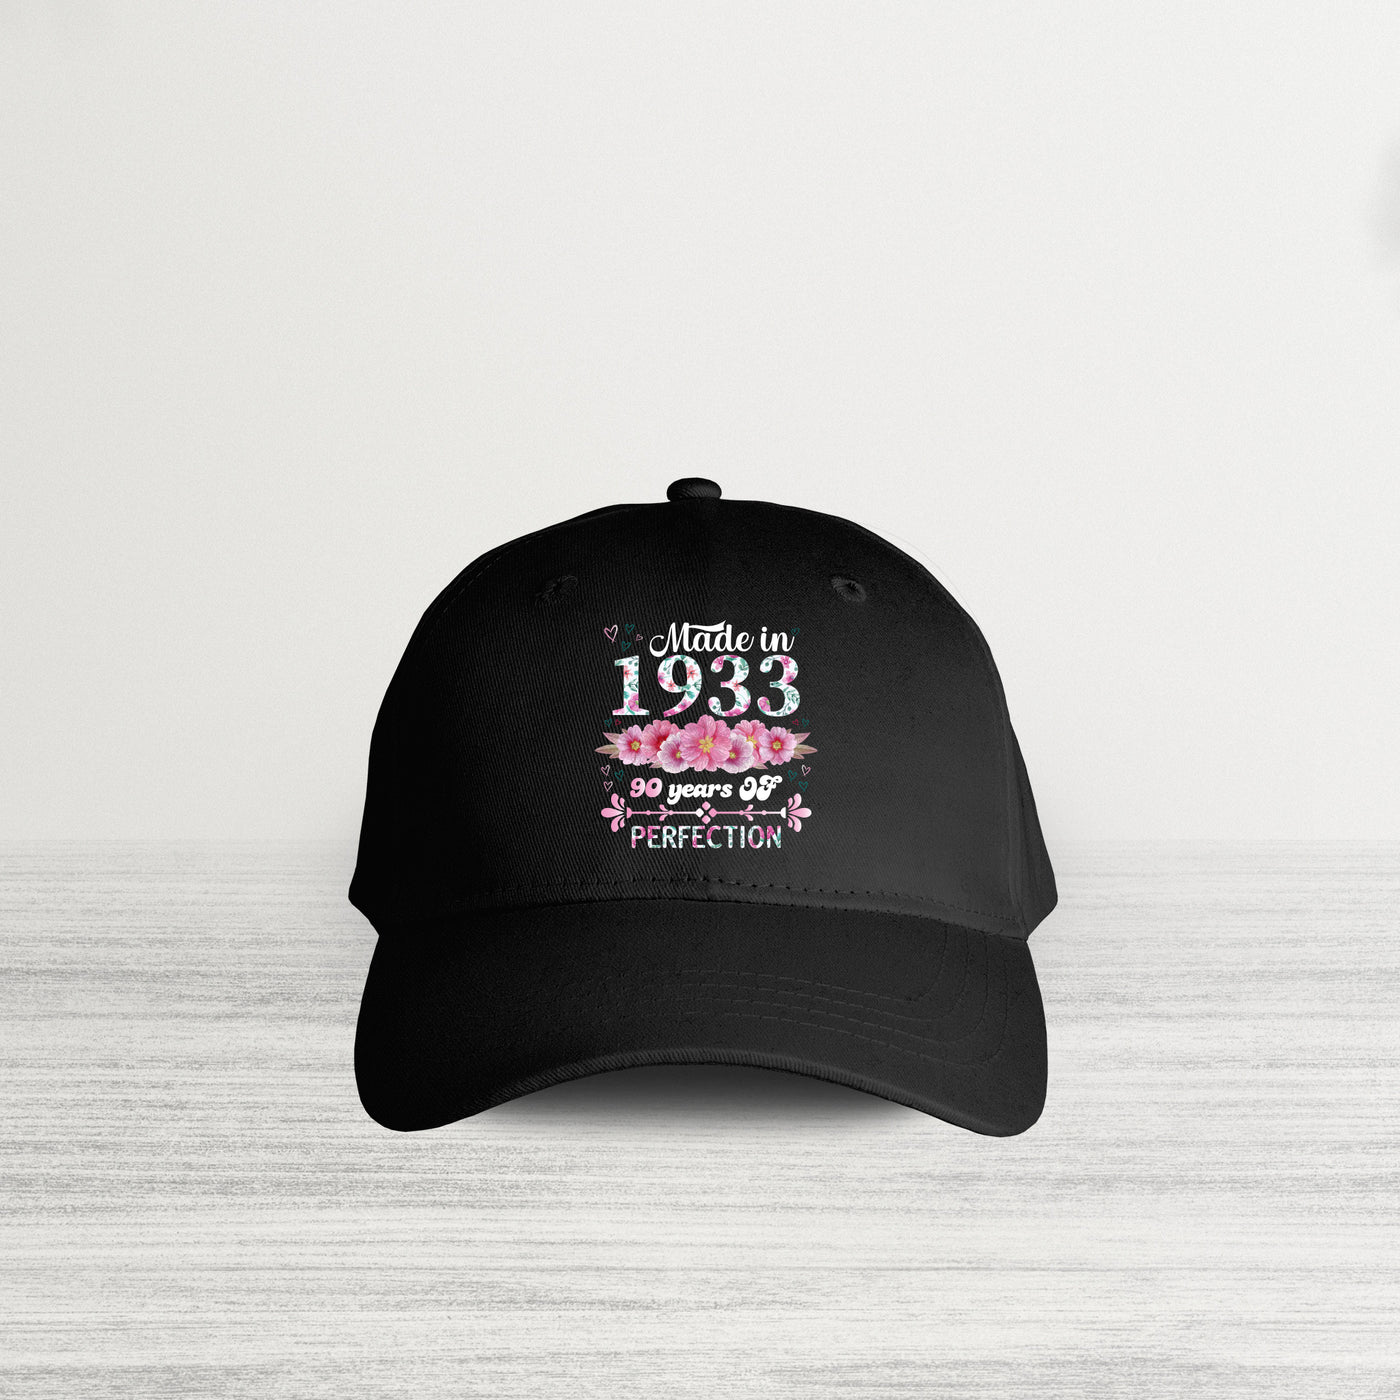 Made in 1933 HAT